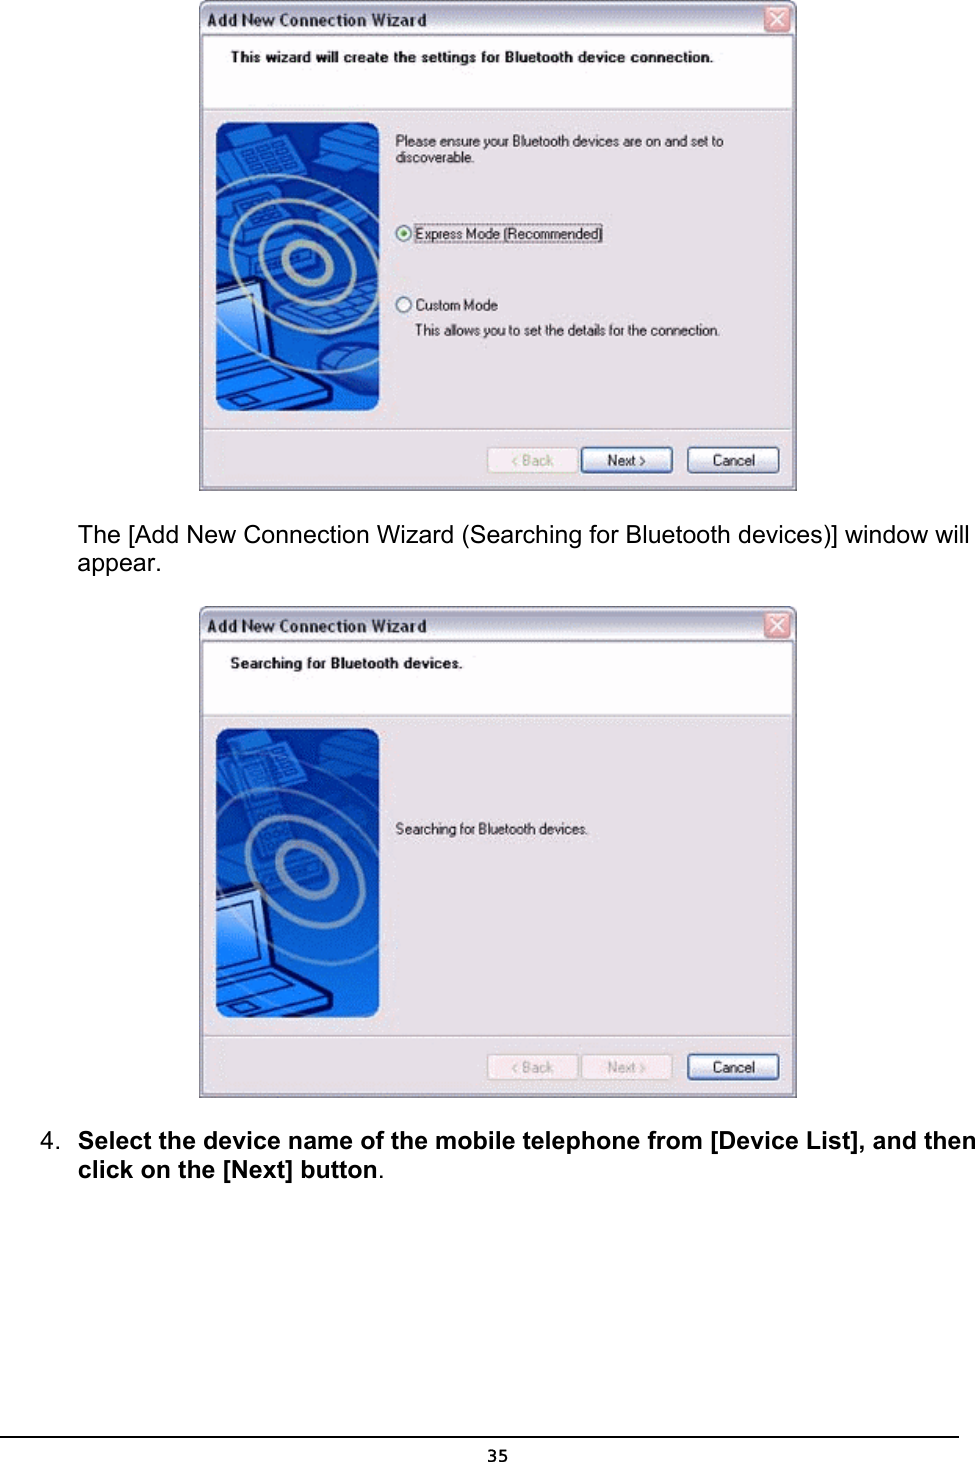   The [Add New Connection Wizard (Searching for Bluetooth devices)] window will appear.  4.  Select the device name of the mobile telephone from [Device List], and then click on the [Next] button.  35